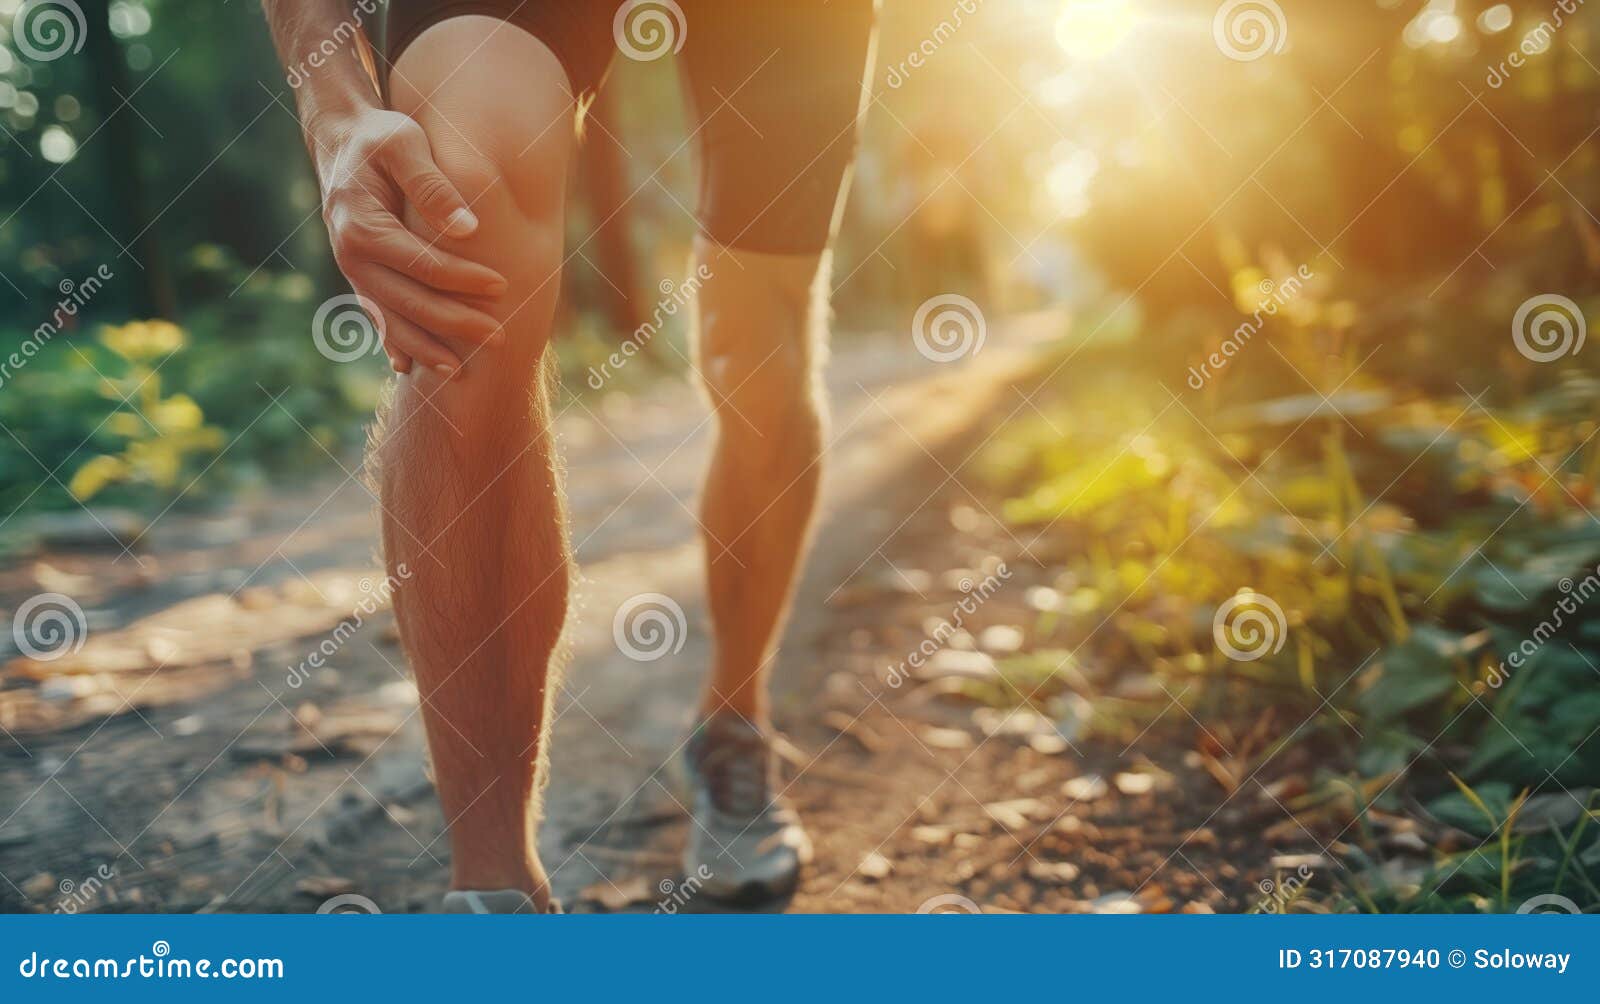 close-up image of young runner athlete on the running path standing and feeling acute knee pain while morning jogging in summer